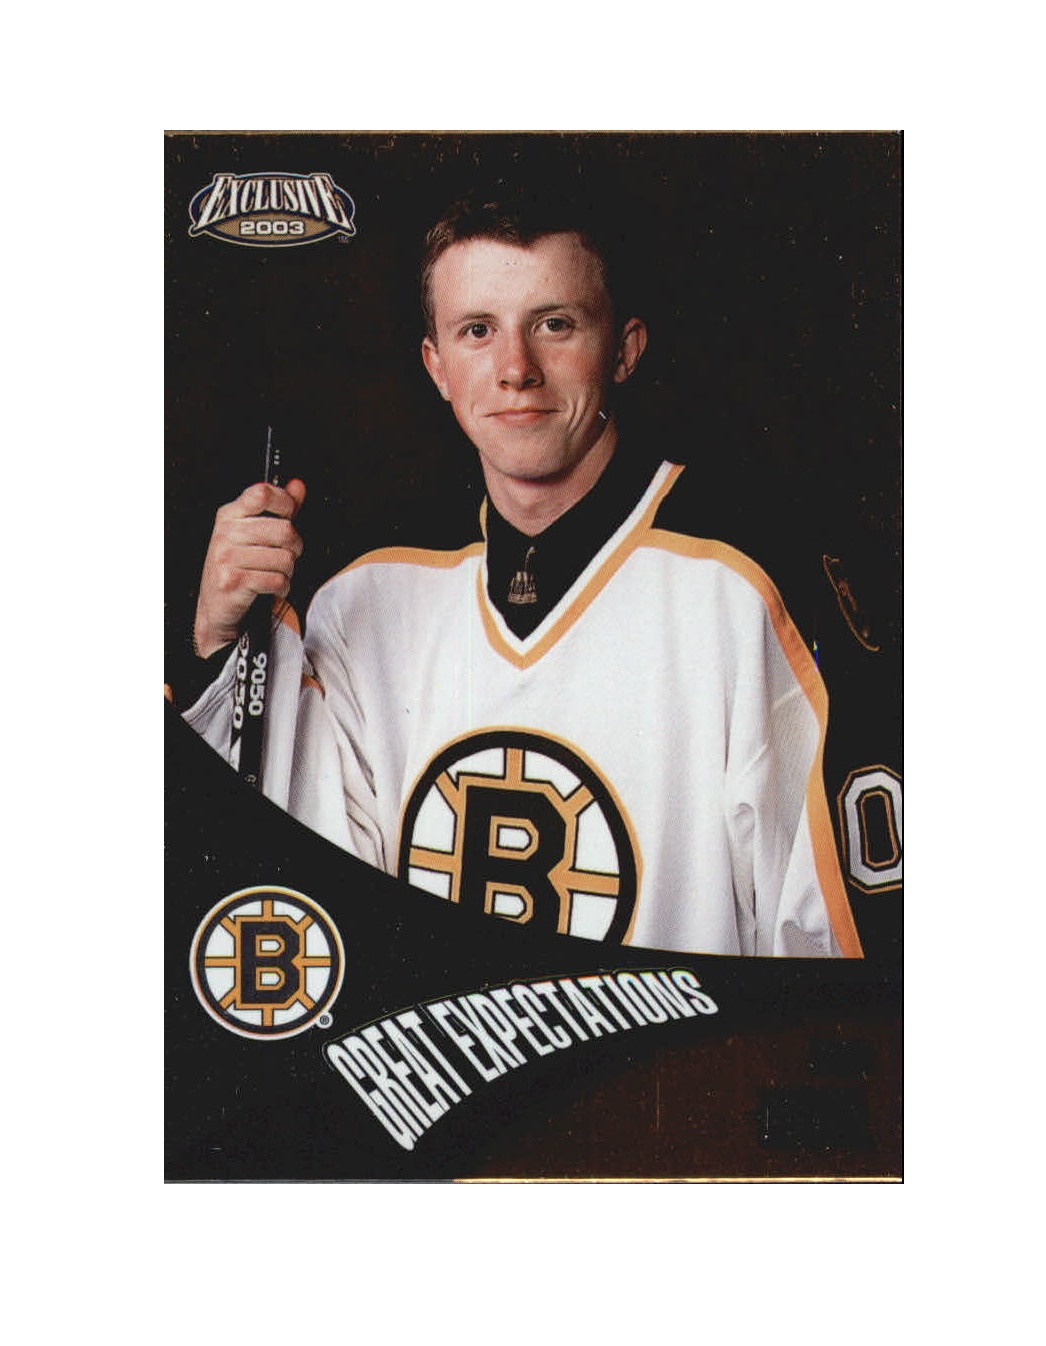 2002-03 Pacific Exclusive Great Expectations #3 Ivan Huml (10-X171-BRUINS)